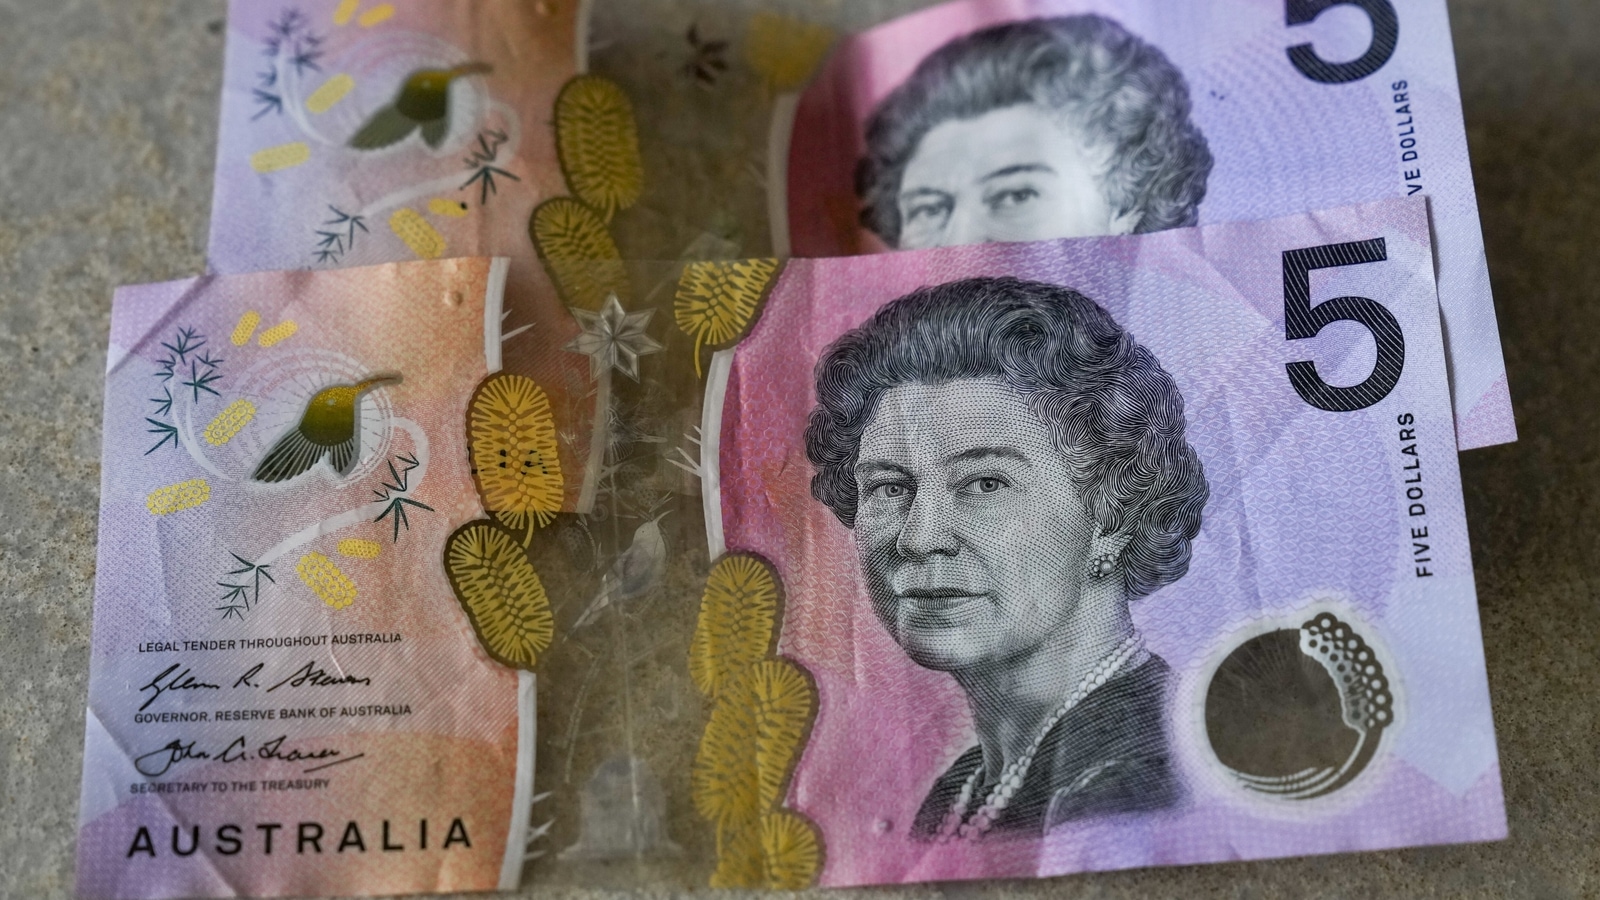 Hail the King? Charles III won't appear on new Australian bank notes. Here's why